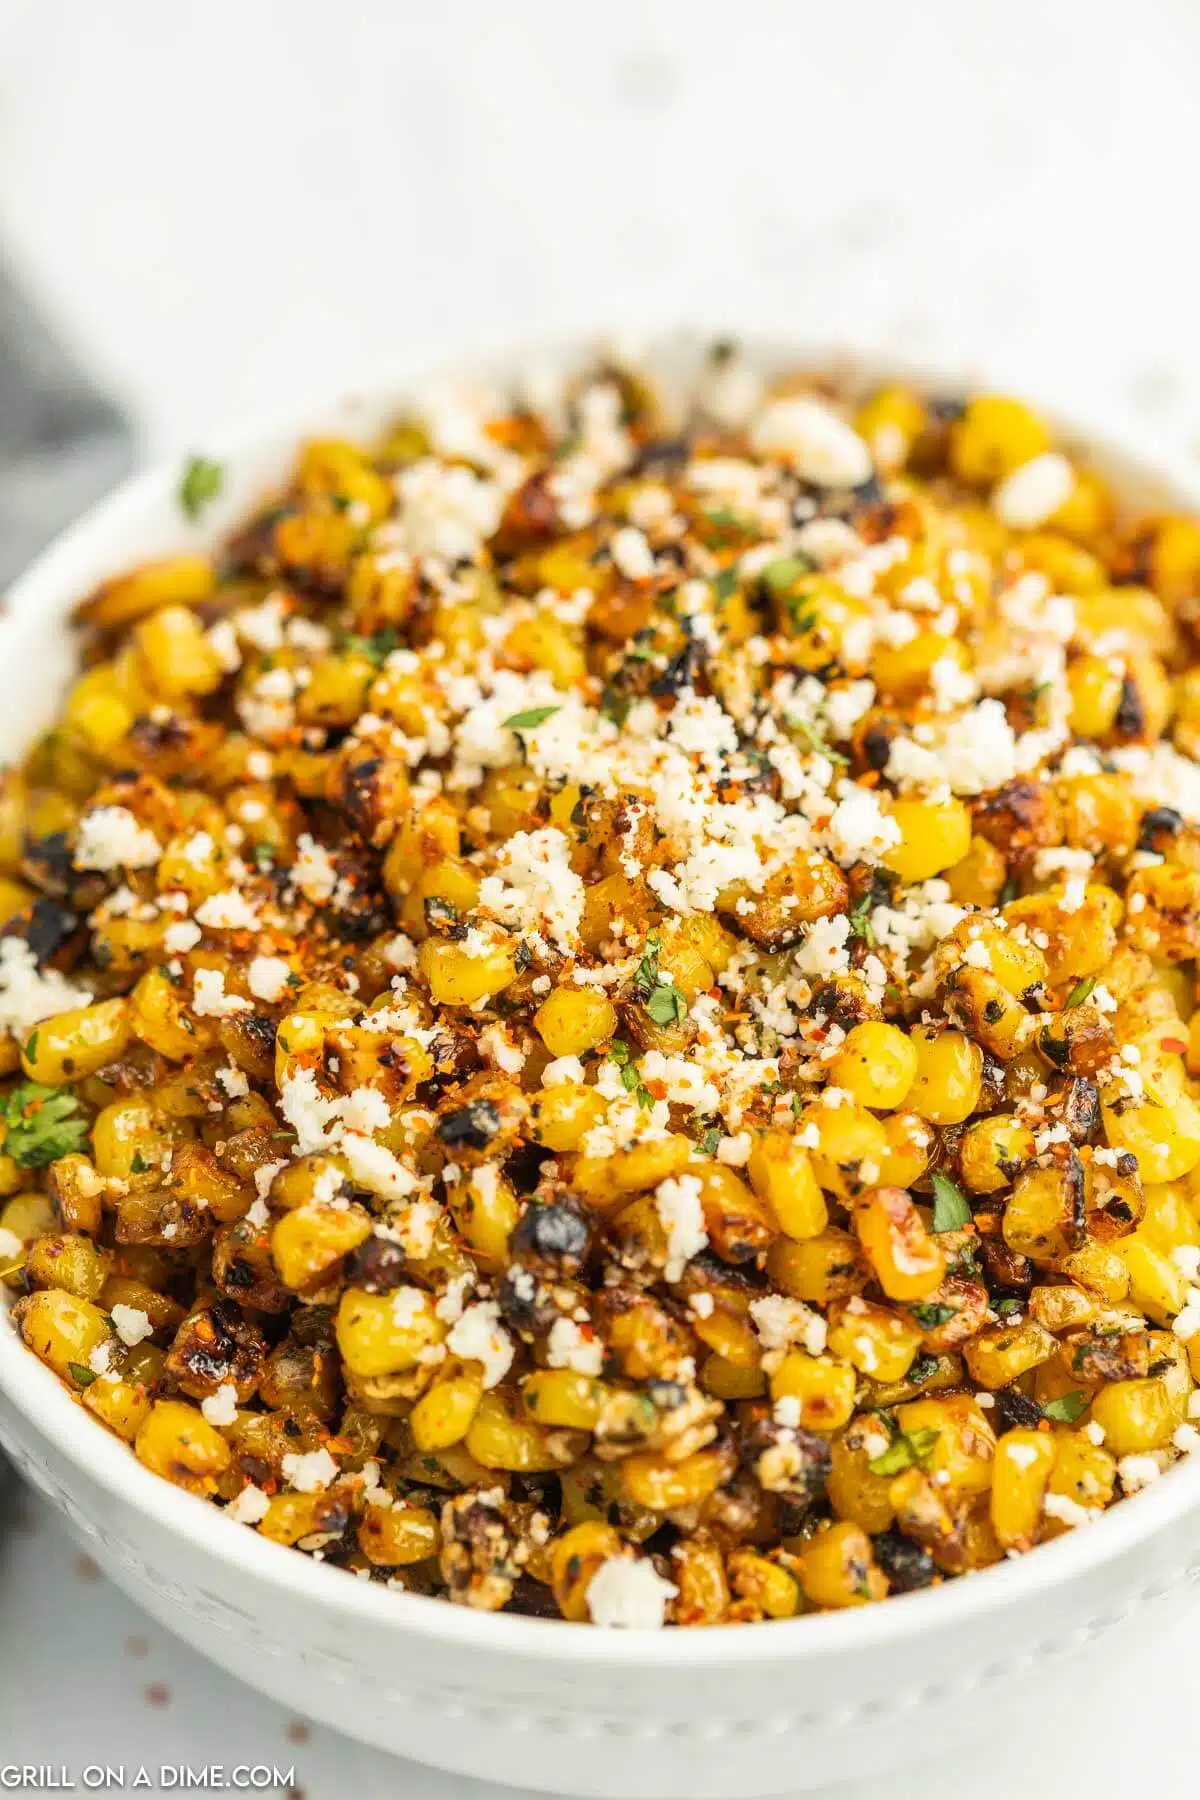 Corn topped with crumbled cheese and spices in a bowl.